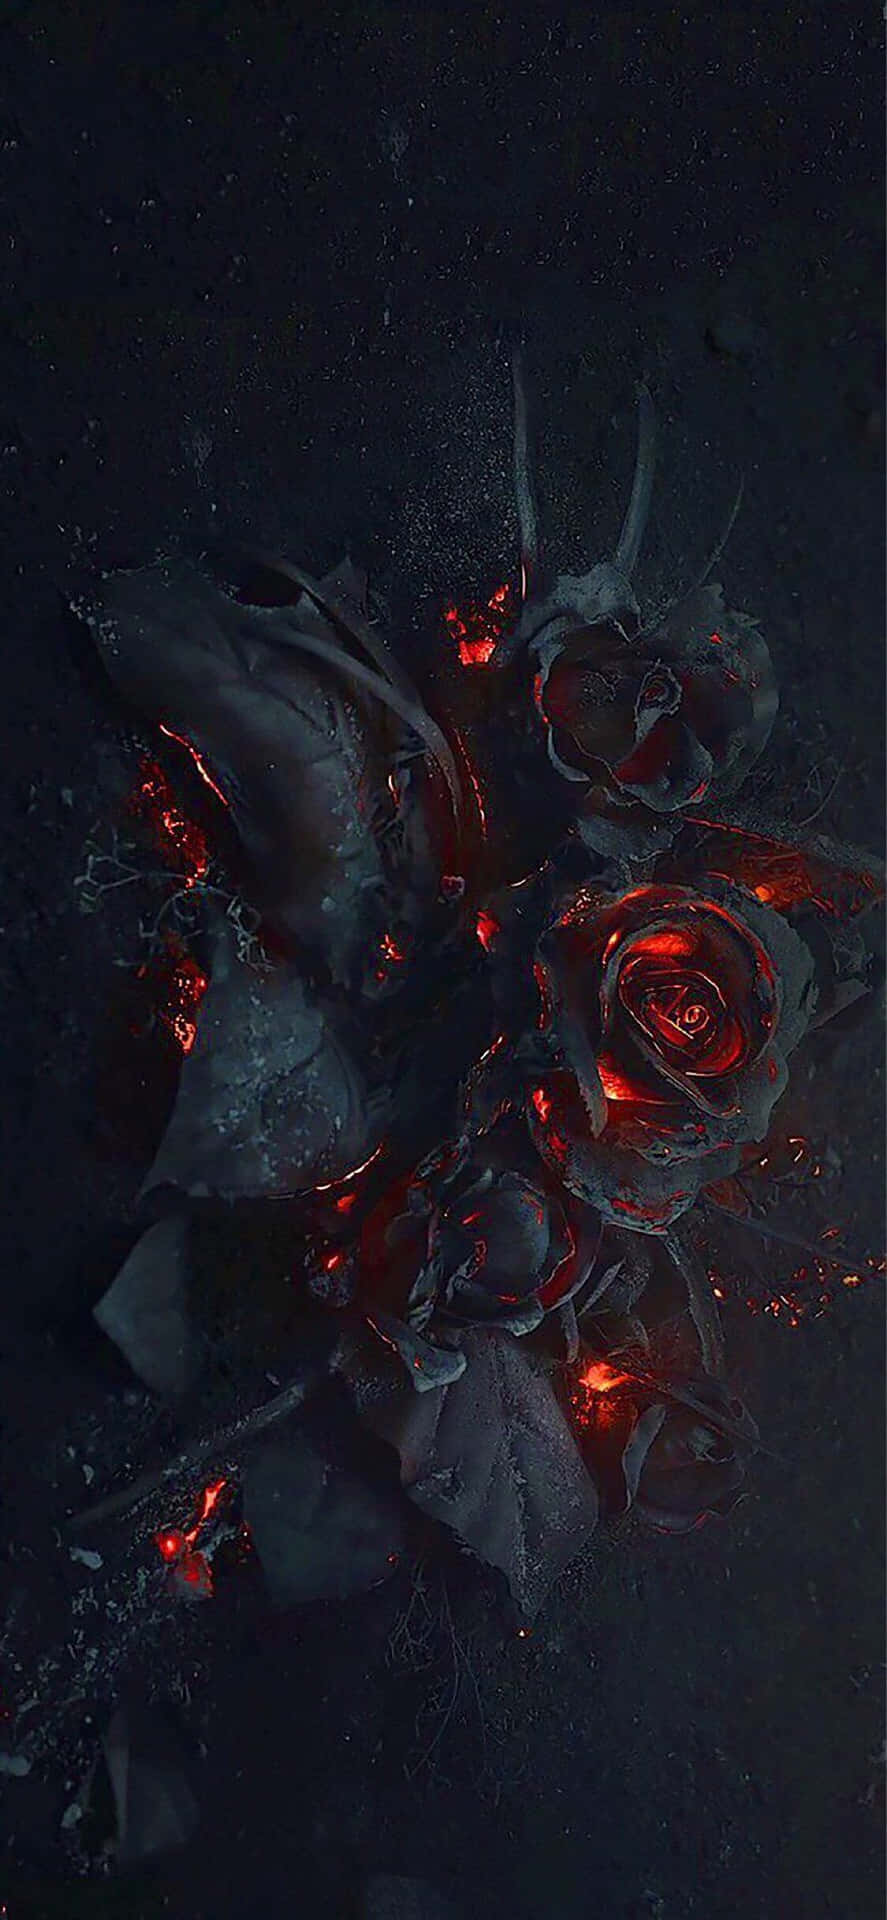 Mysterious and Elegant Gothic Iphone Wallpaper